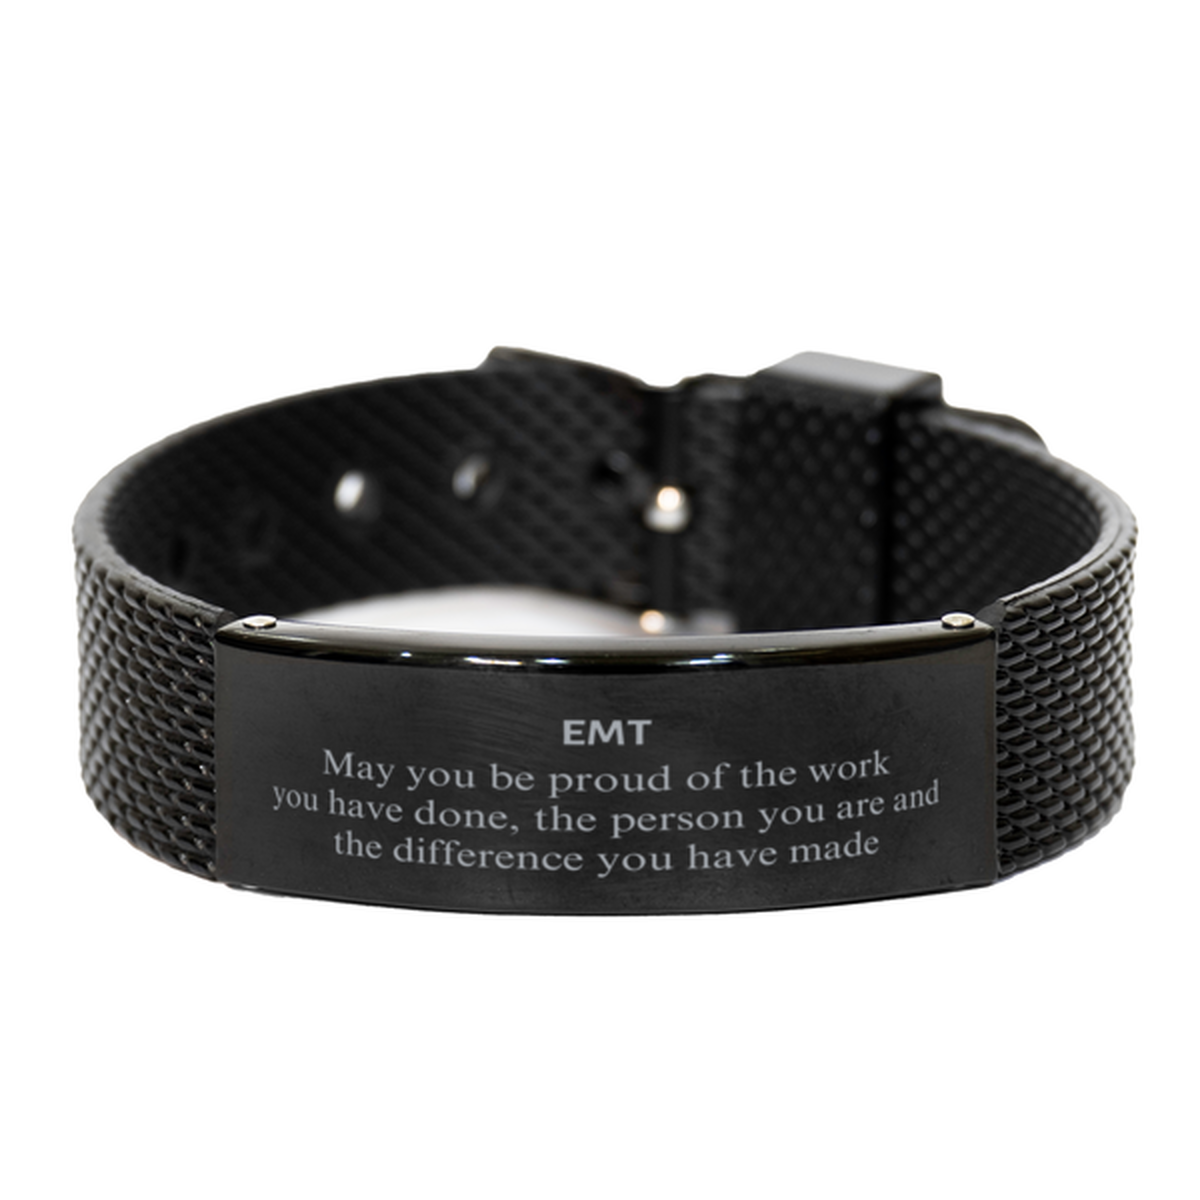 EMT May you be proud of the work you have done, Retirement EMT Black Shark Mesh Bracelet for Colleague Appreciation Gifts Amazing for EMT